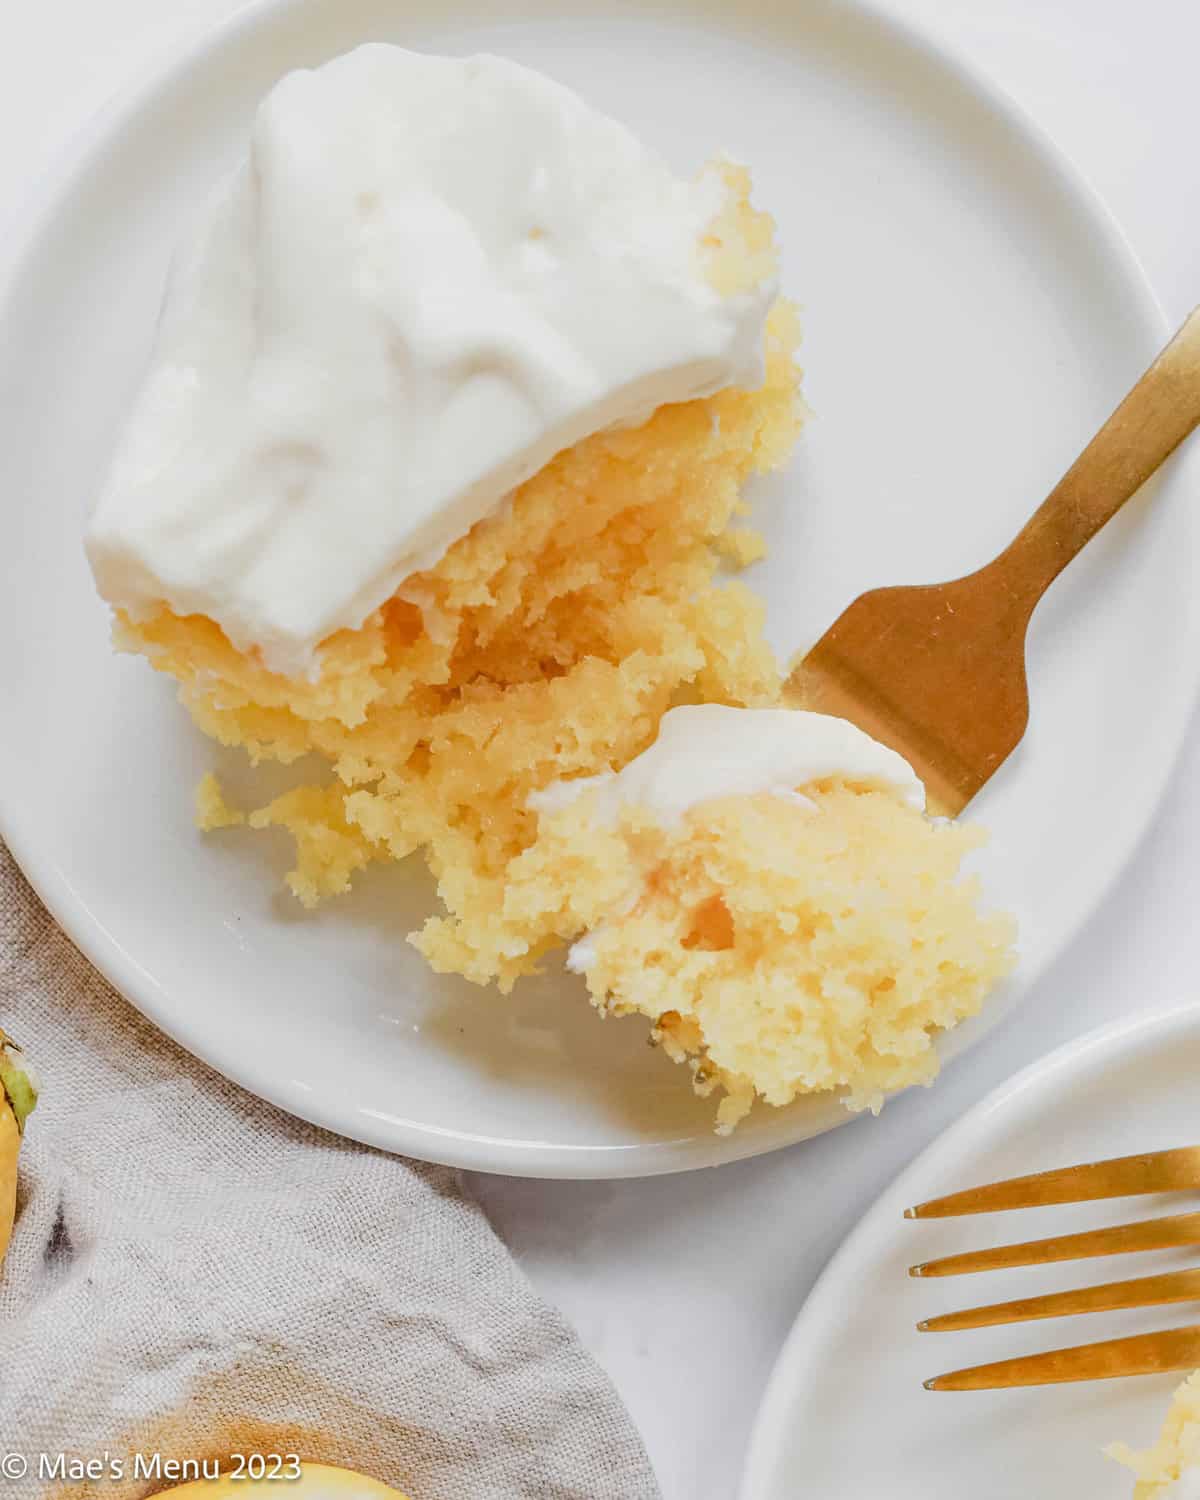 A piece of lemon poke cake on.a white plate with a fork taking a bite out of it.